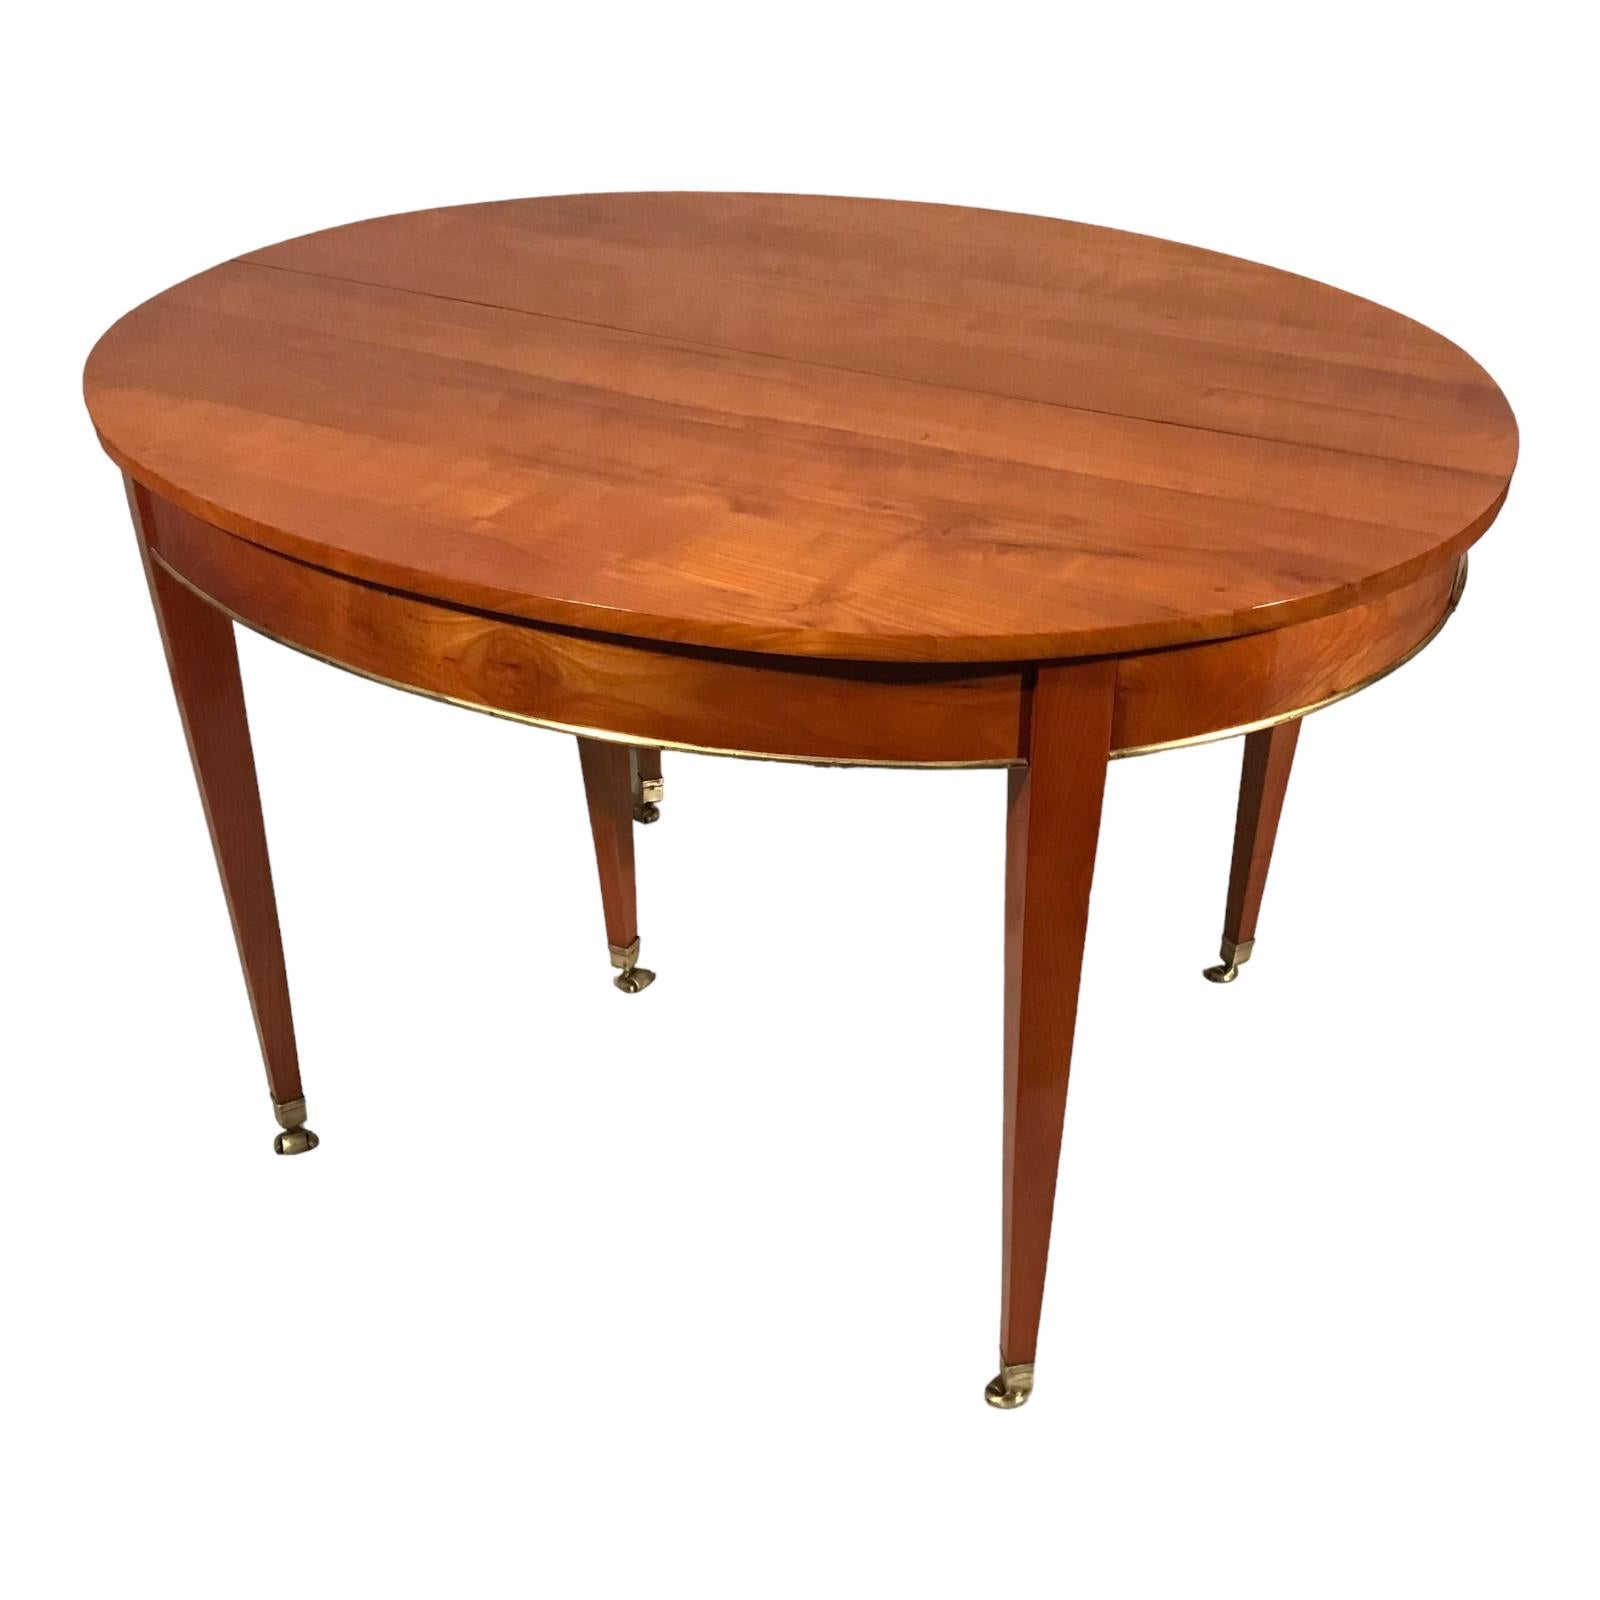 This elegant Neoclassical Dining Room Table dates back to the mid 19th century and comes from Germany. The table features a pretty cherry veneer and has a brass band around the apron. It stands on six tapered legs with their original brass casters.